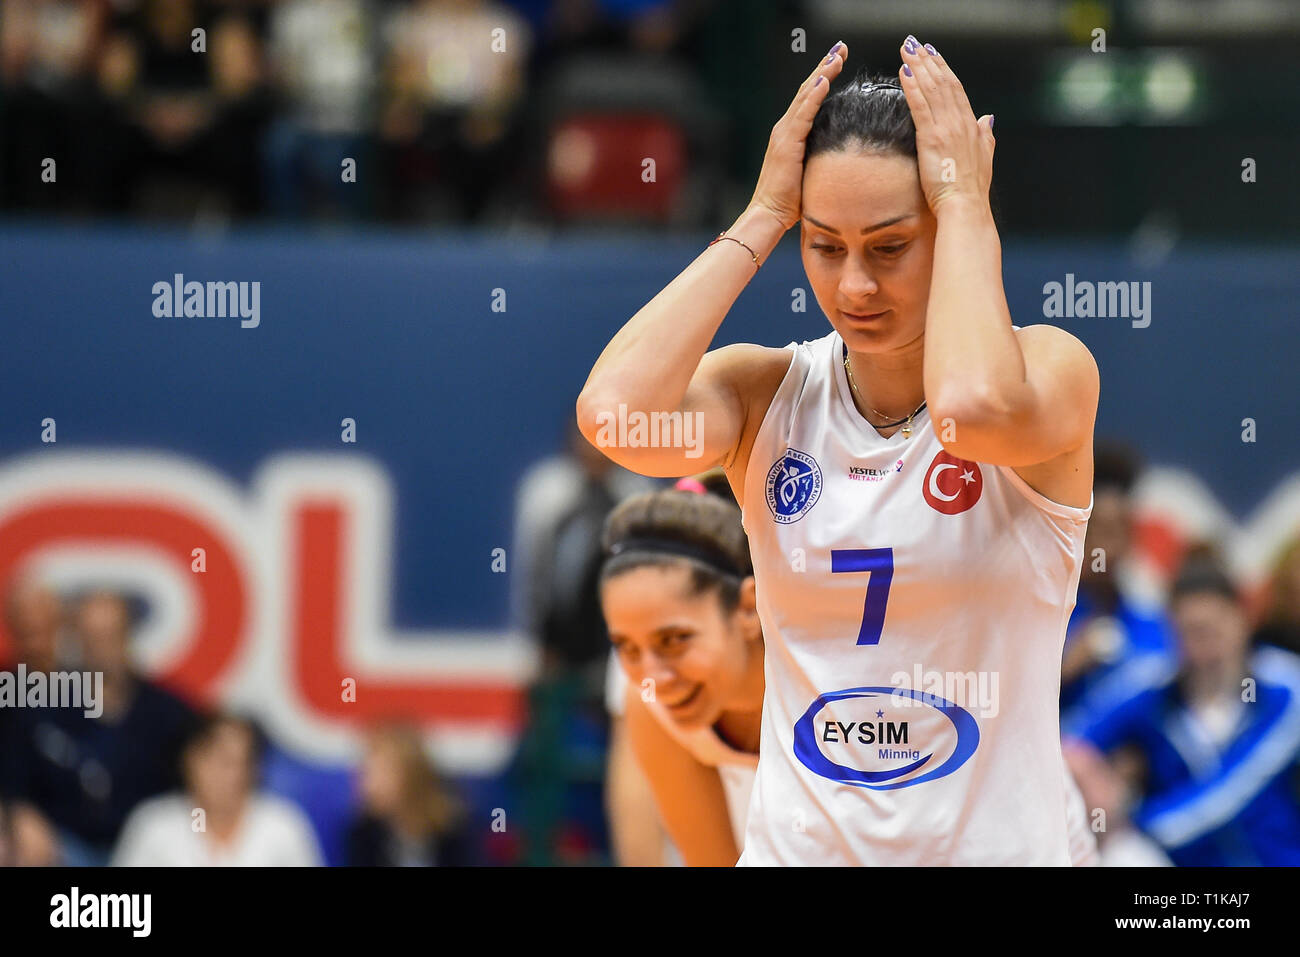 Candy Arena, Monza, Italy. 27th March, 2019. CEV Volleyball Challenge Cup women, Final, 2nd leg. Desislava Nikolova of Aydin BBSK delusion during the match between Saugella Monza and Aydin BBSK at the Candy Arena Italy.  Credit: Claudio Grassi/Alamy Live News Stock Photo